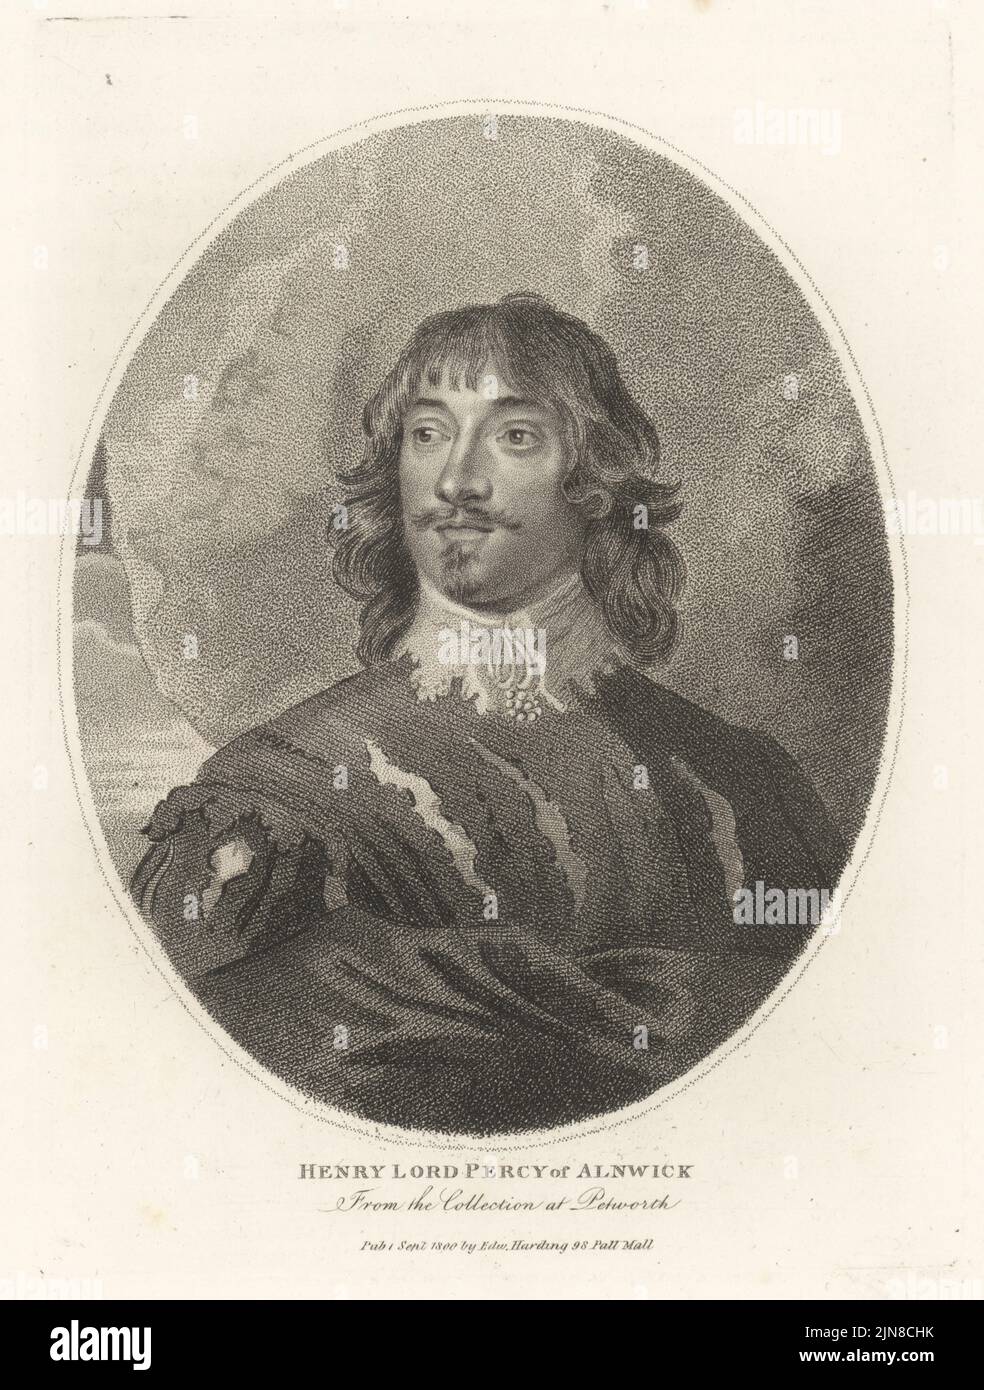 Henry Percy, Baron Percy of Alnwick, died 1659. Sat in the Short Parliament as the member for Portsmouth and in the Long Parliament as MP for Northumberland. In van Dyke beard, lace collar, doublet, with cloak. From the collection at Petworth House. Henry, Lord Percy of Alnwick. Copperplate engraving by Edward Harding from John Adolphus’ The British Cabinet, containing Portraits of Illustrious Personages, printed by T. Bensley for E. Harding, 98 Pall Mall, London, 1799. Stock Photo